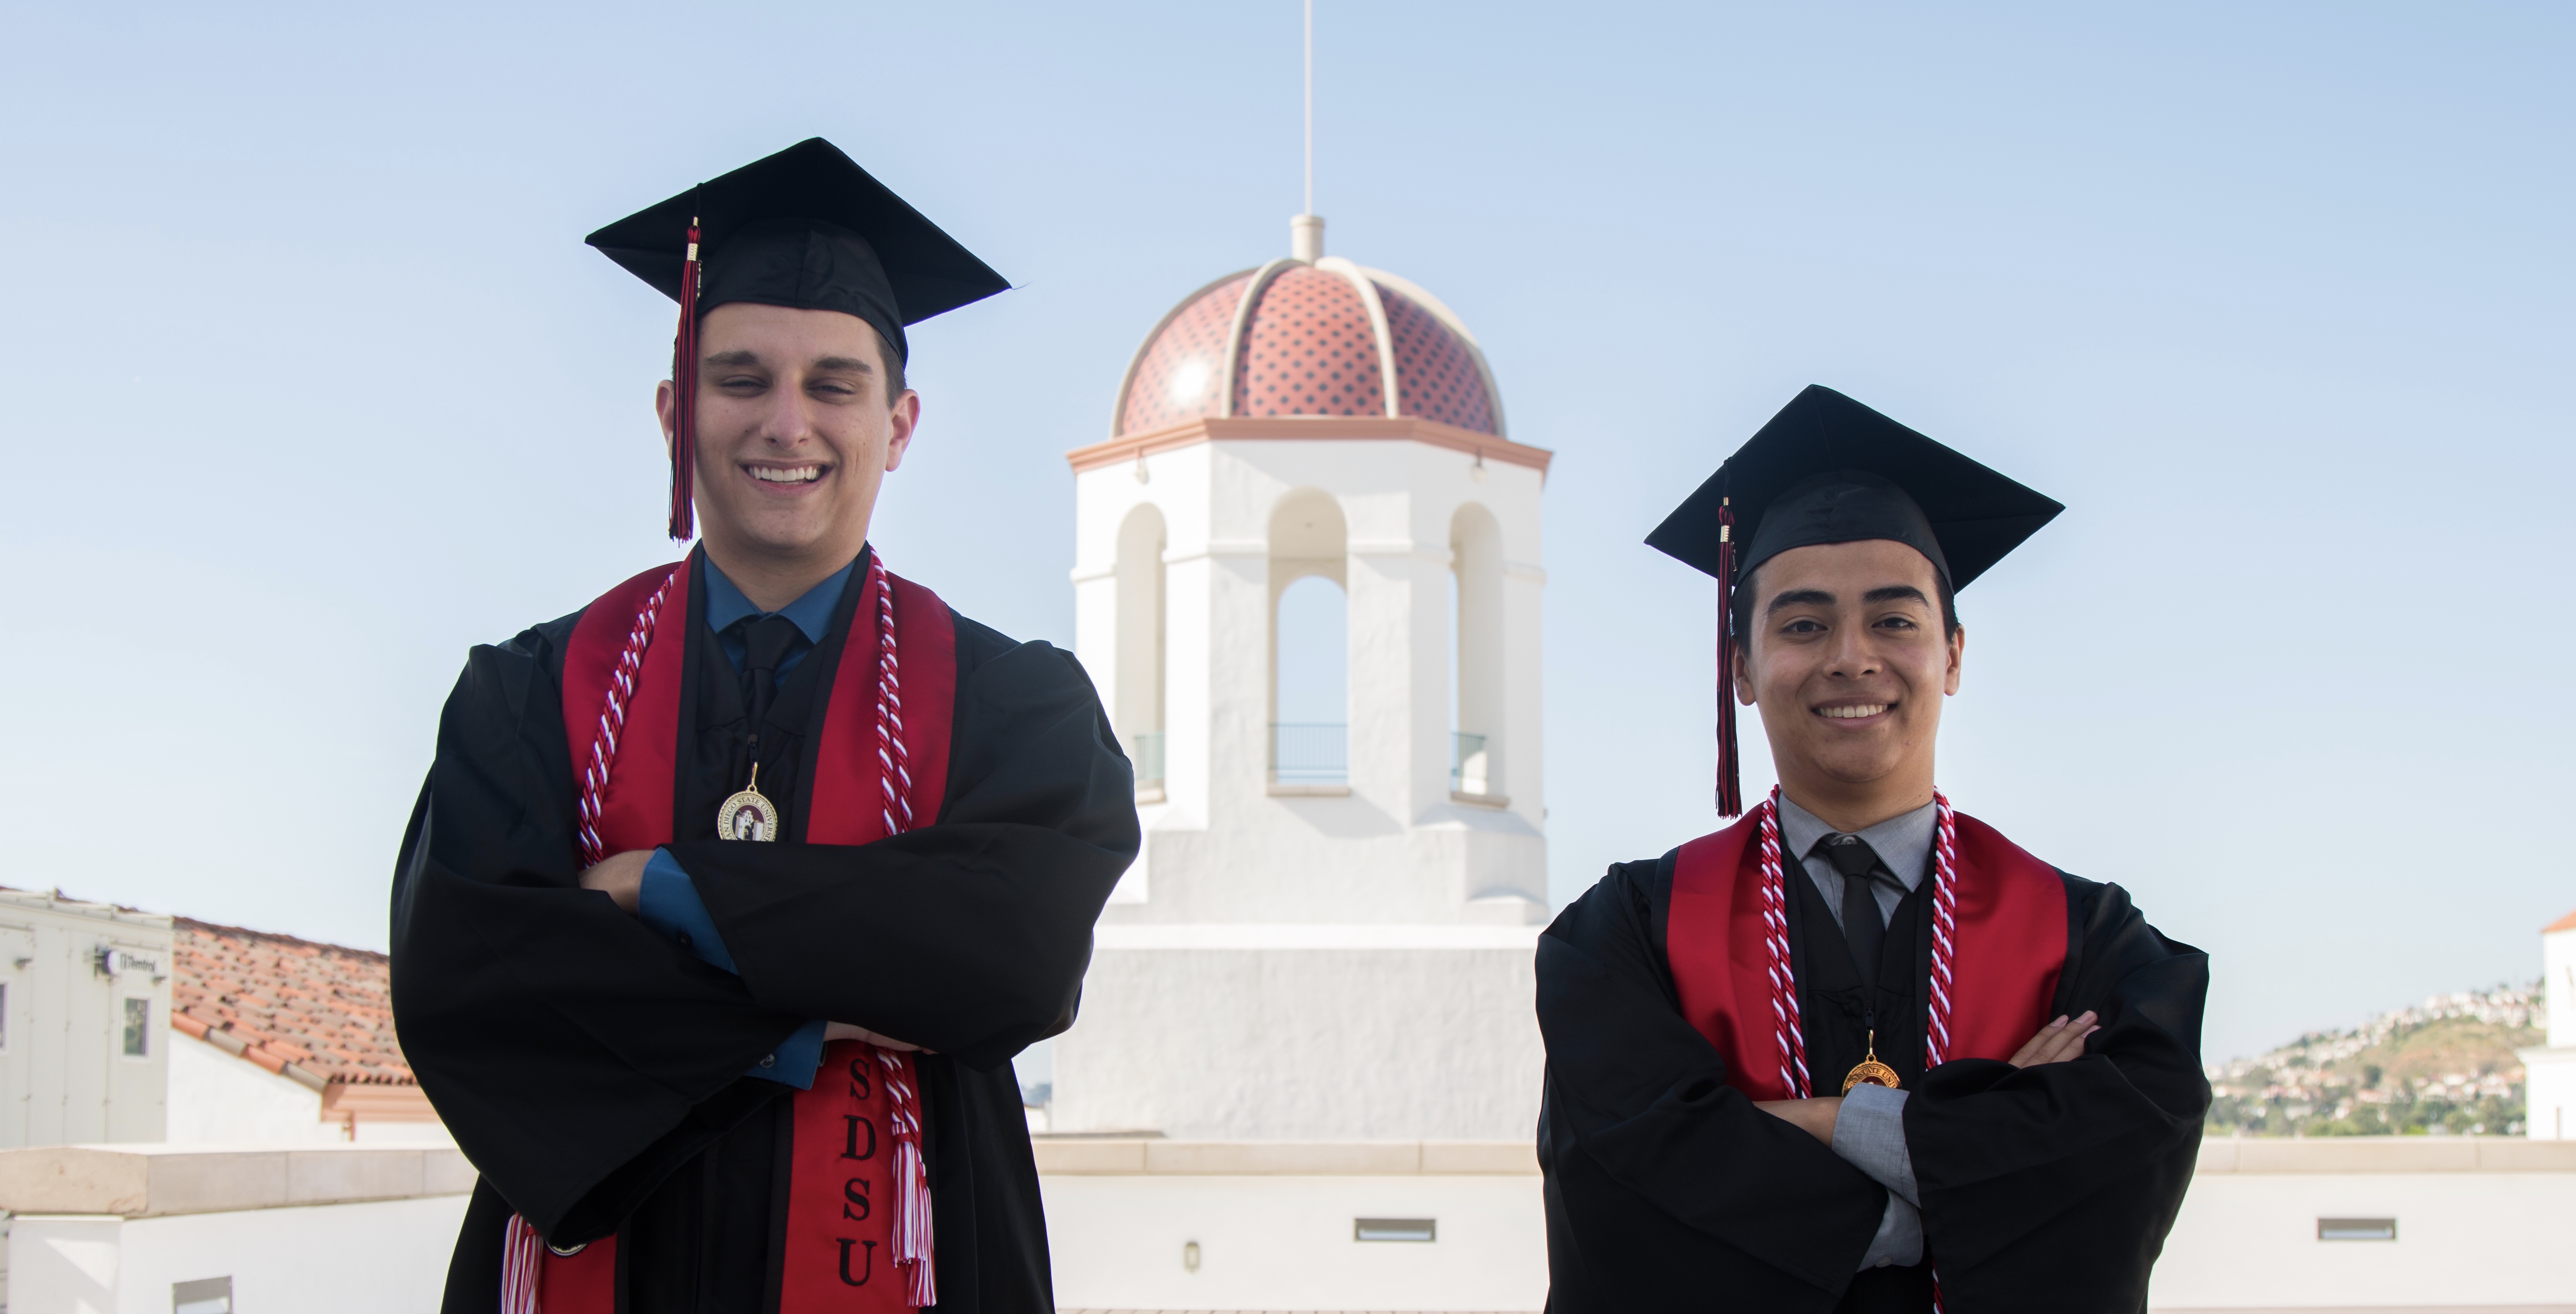 Matt Hoffman and Anthony Reclusado pose in the Student Union at SDSU.